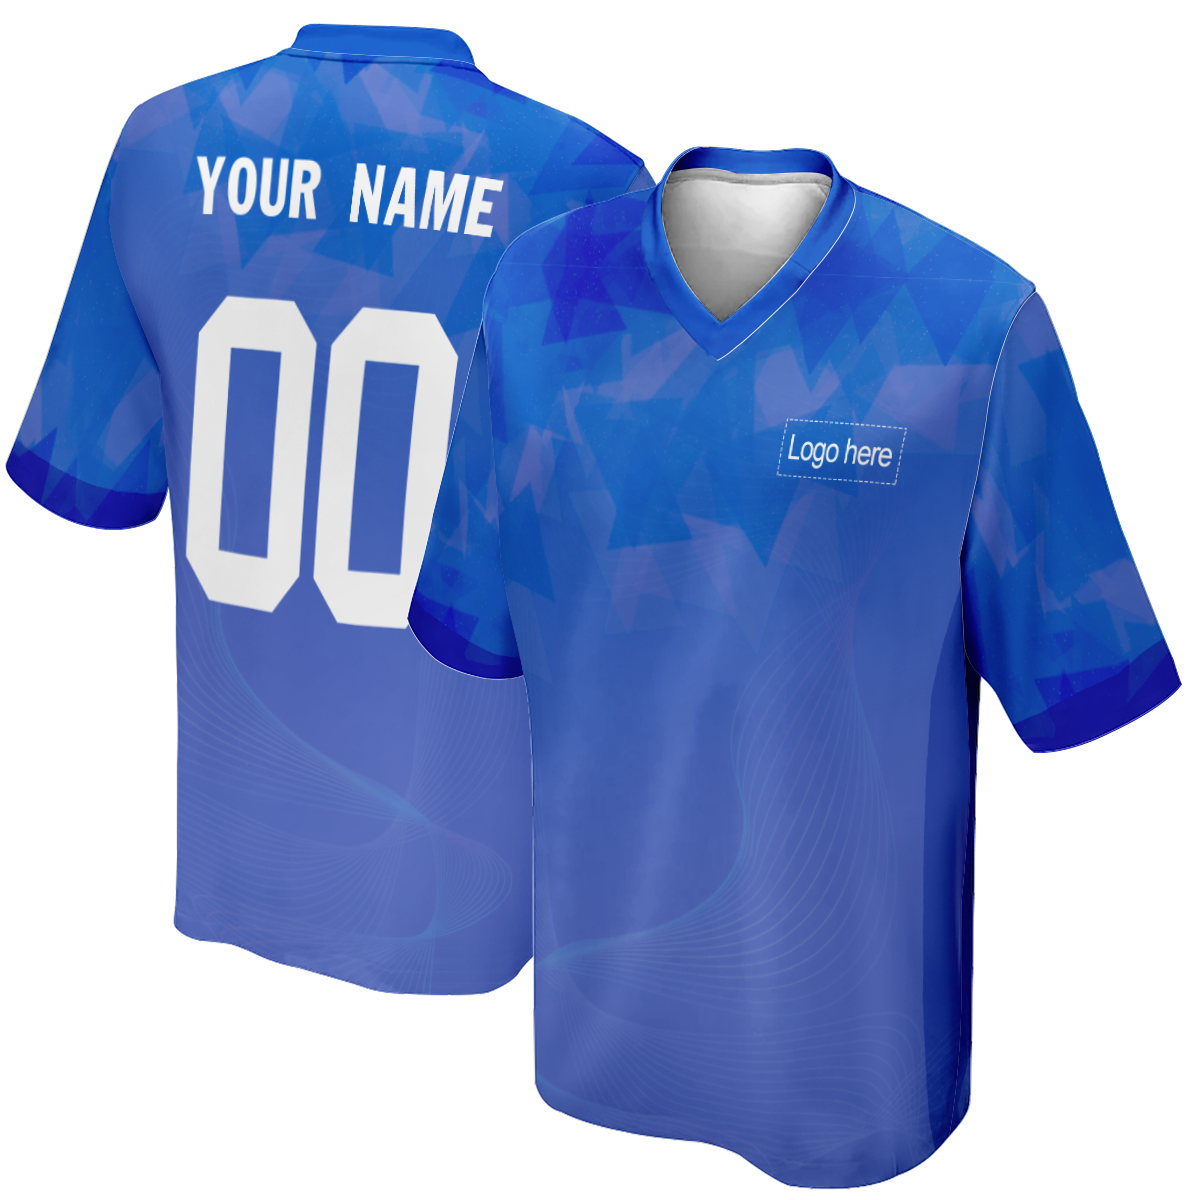 Custom Men's Authentic World Cup Brazil Team Soccer Jersey With Name